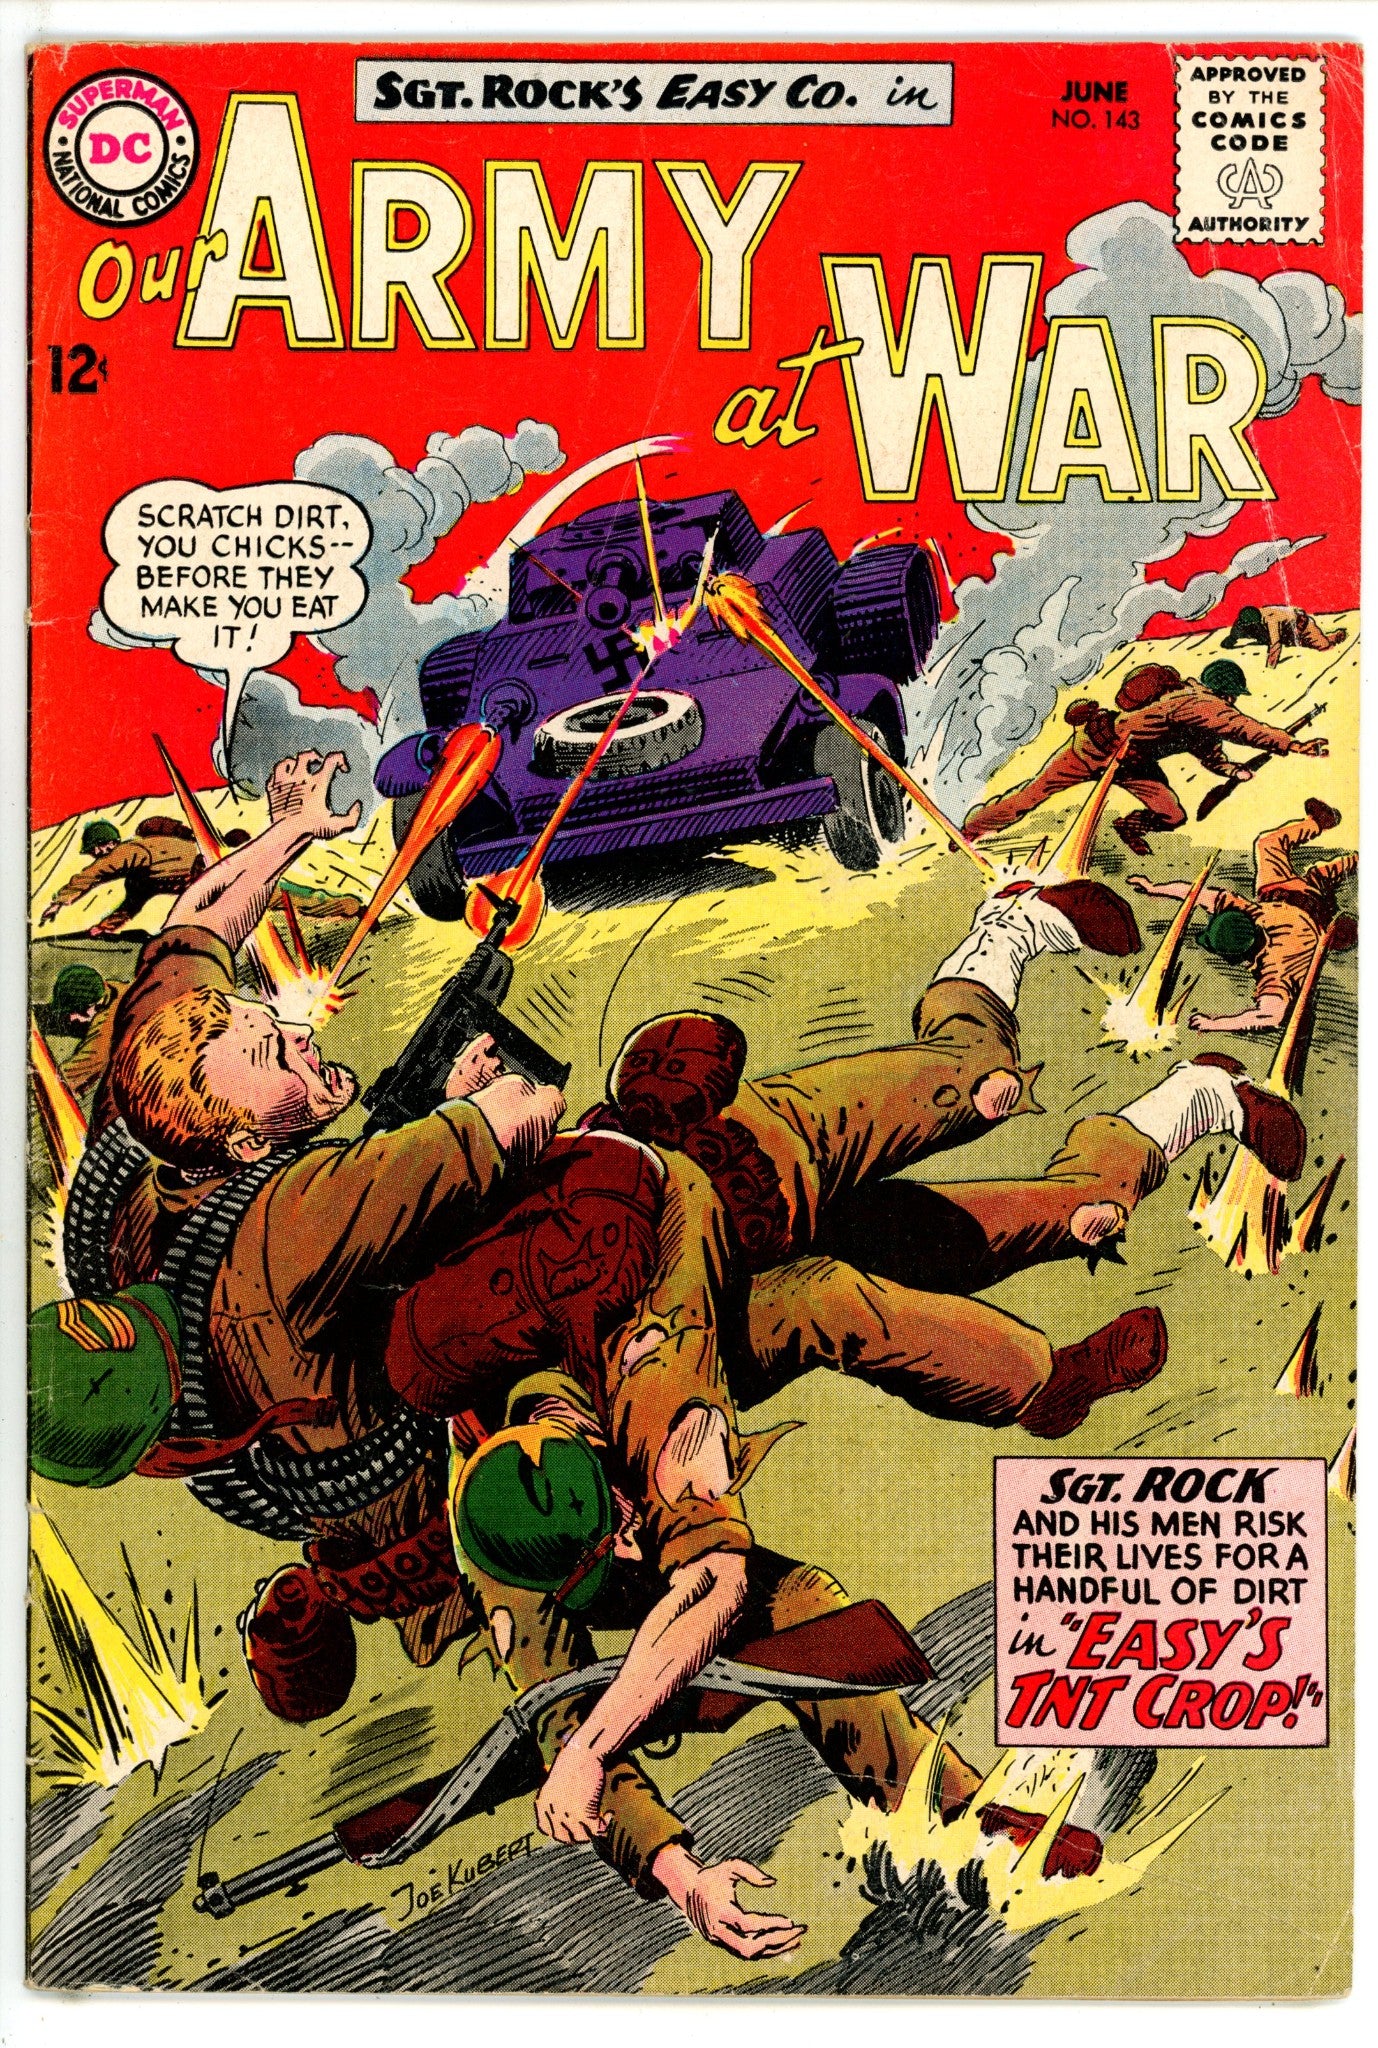 Our Army at War Vol 1 143 VG+ (4.5) (1964) 